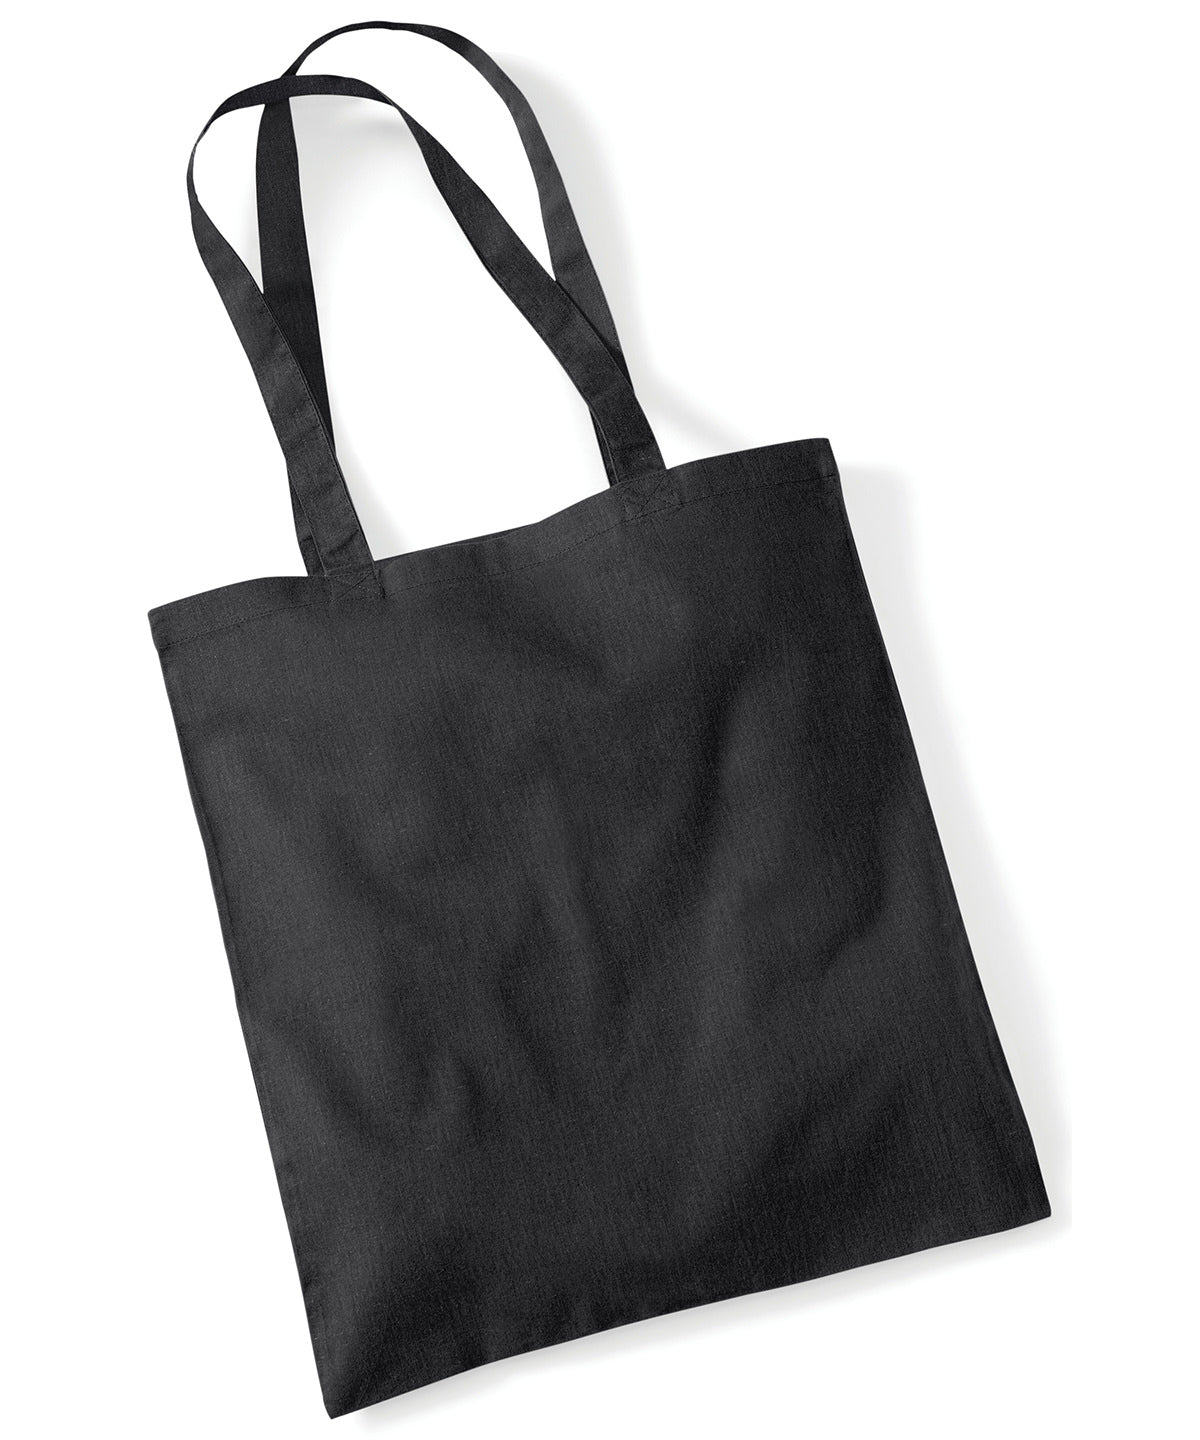 Long Handle Tote bag with Printed Quotes